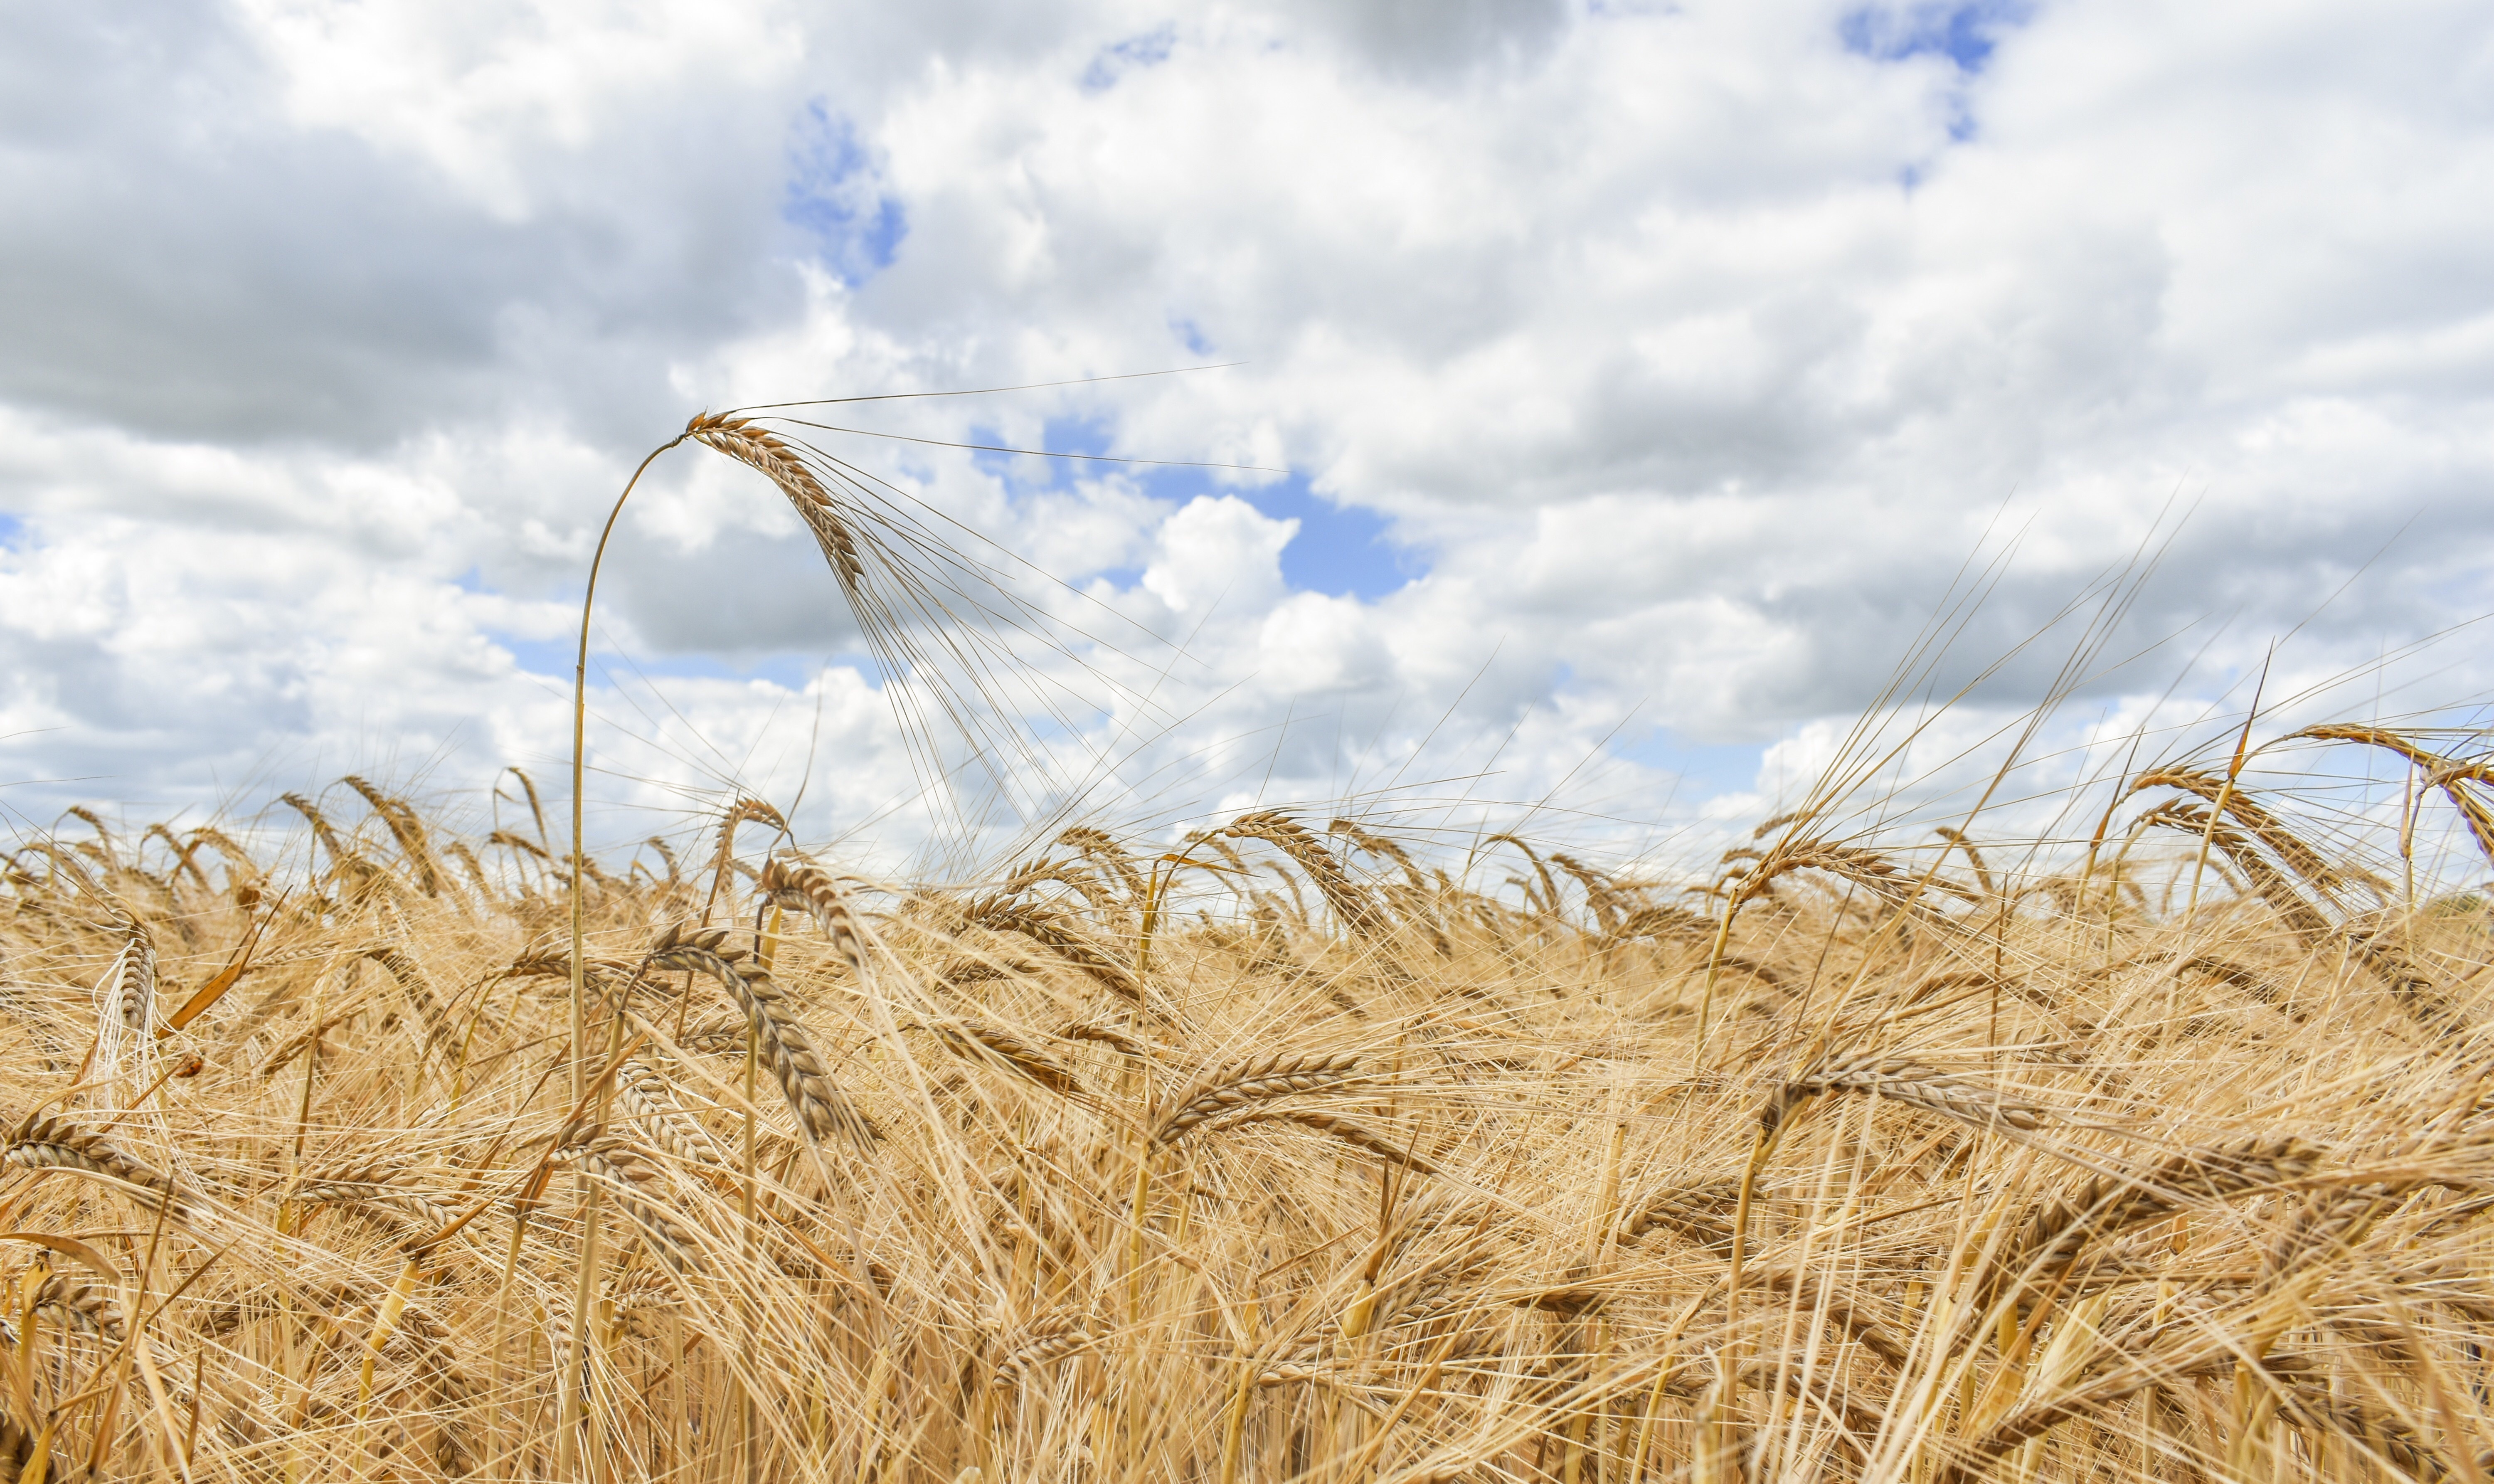 How Does Corporate Sustainability Factor in Family Farmers? General Mills and its Priority Crops